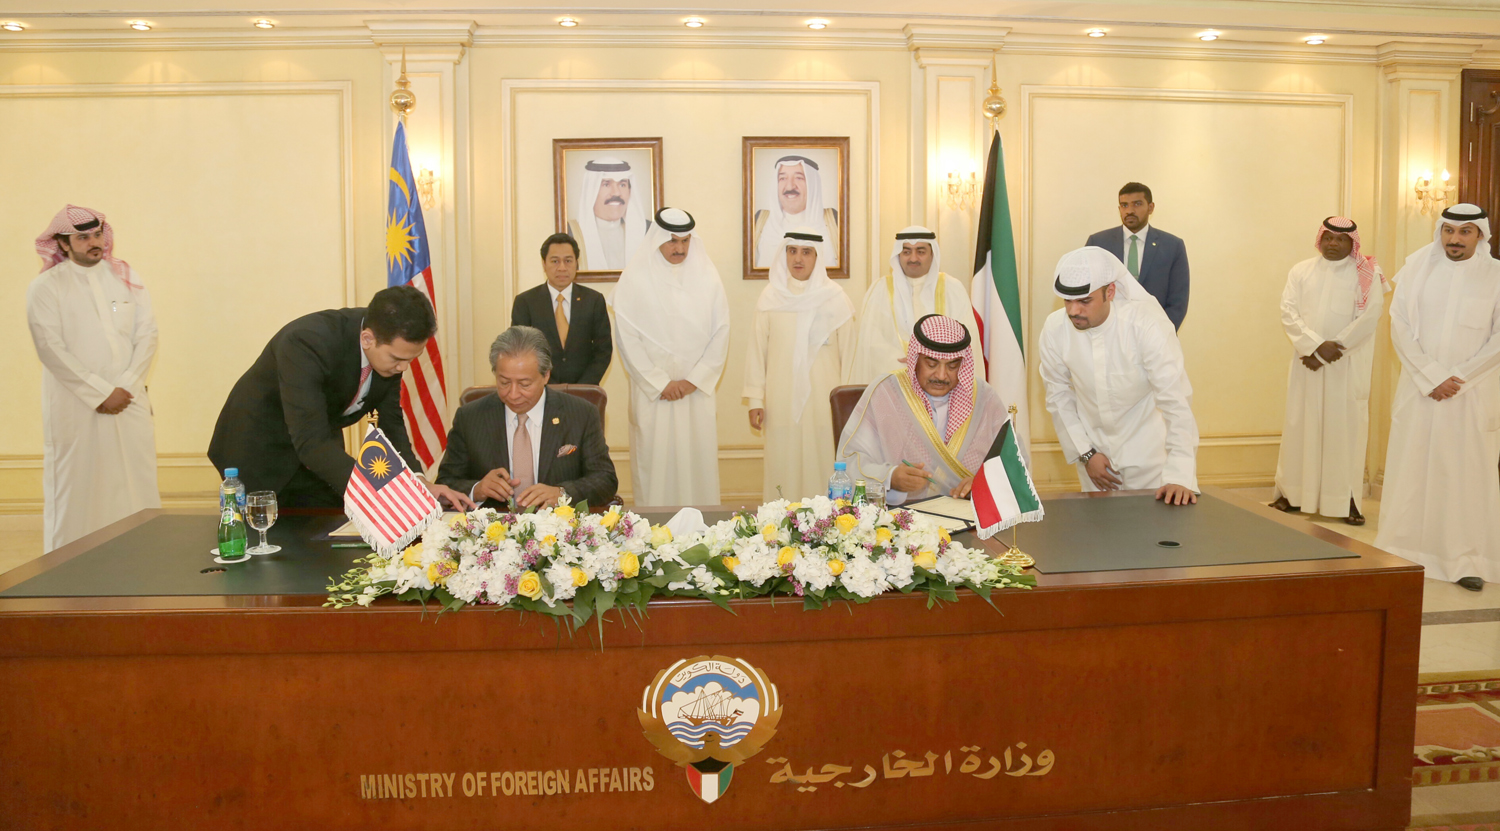 First Deputy Prime Minister and Foreign Minister Sheikh Sabah Al-Khaled Al-Hamad Al-Sabah and his Malaysian counterpart Dato Sri Anifah Haji Aman during the signing ceremony